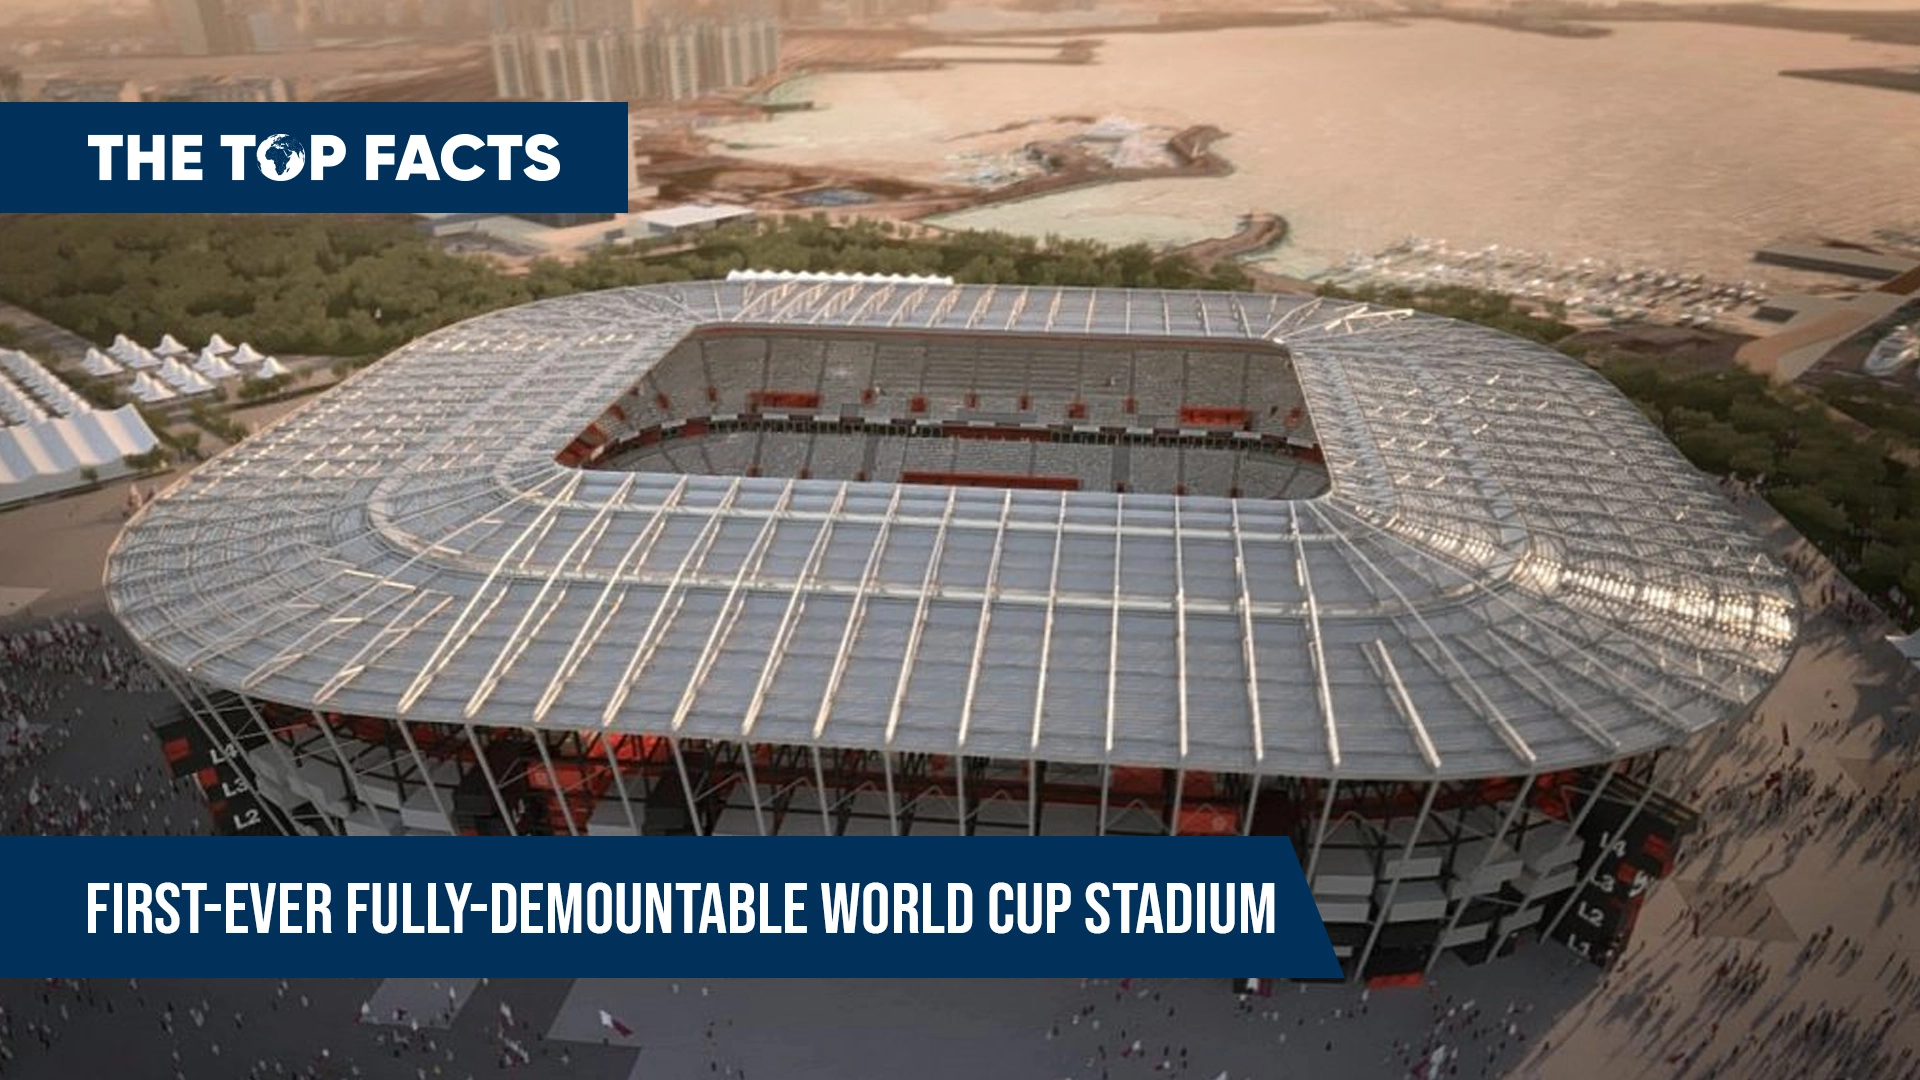 Introducing the innovative, fully-demountable World Cup stadium - a first of its kind!